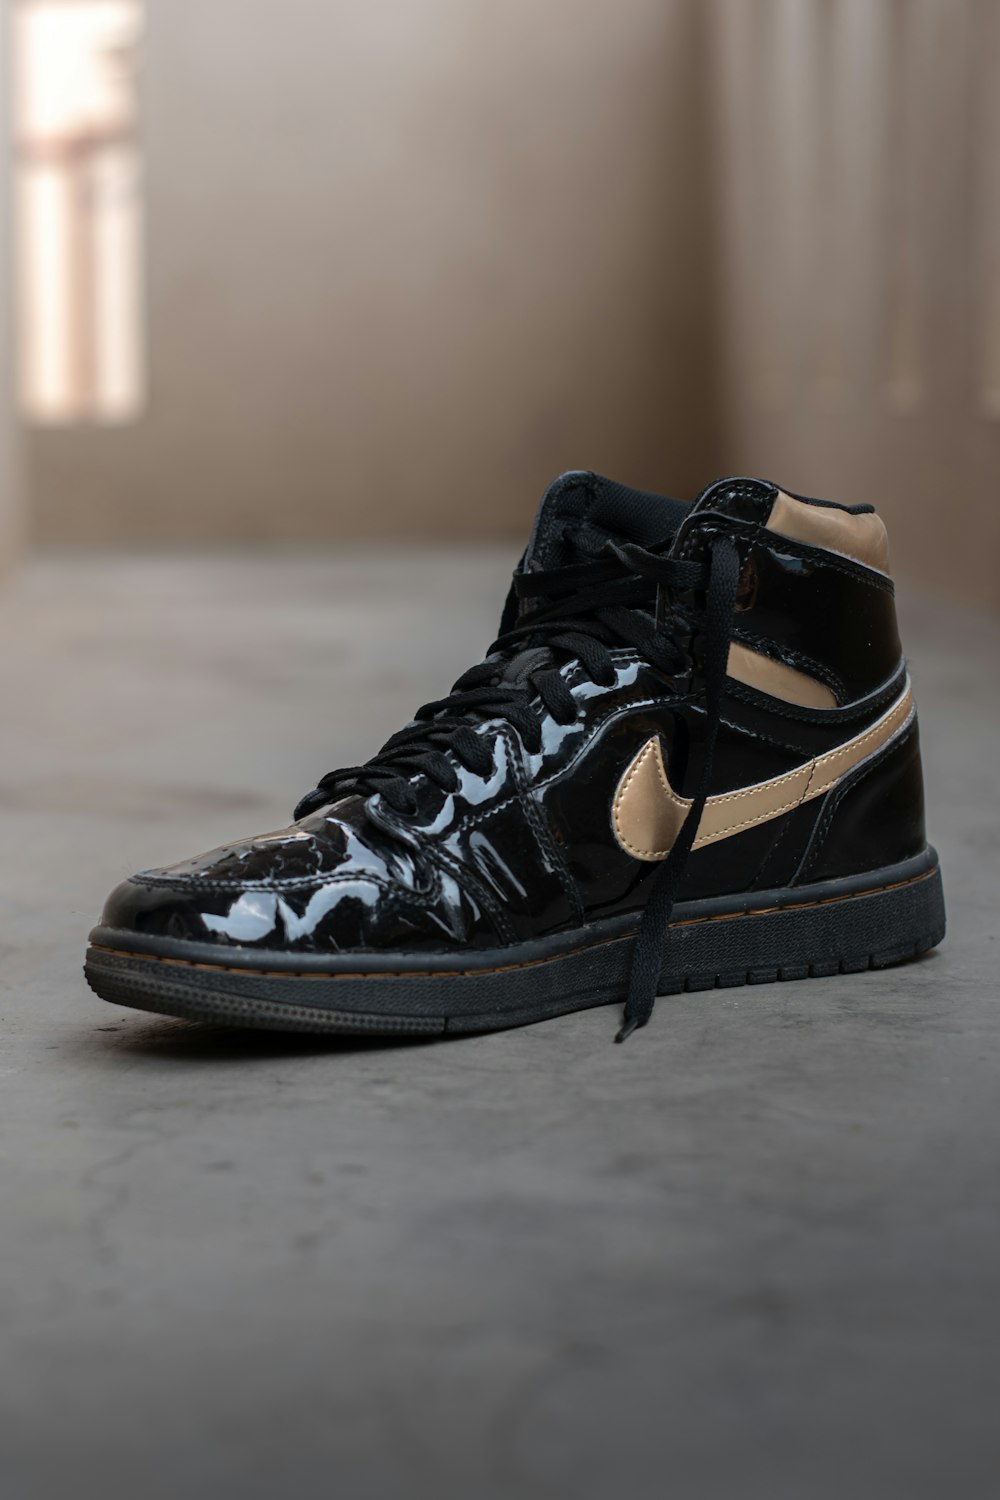 a pair of black and gold nike sneakers